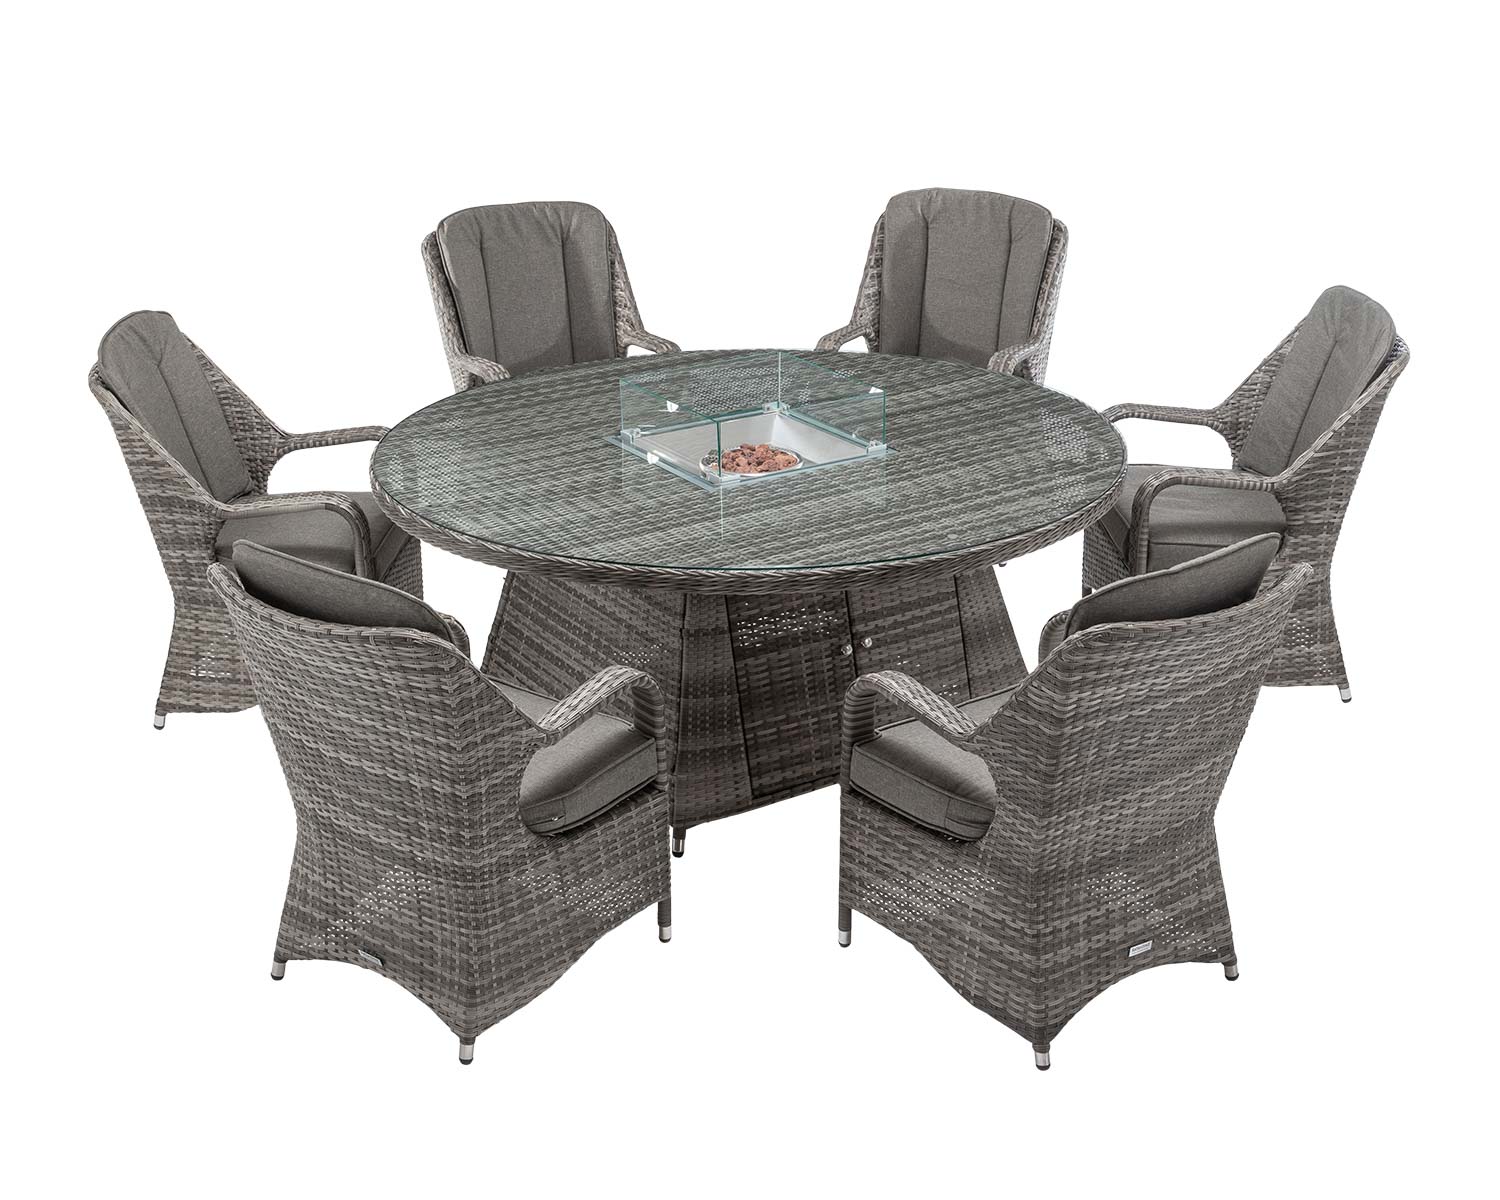 6 Seat Rattan Garden Dining Set With Large Round Table In Grey With Fire Pit Marseille Rattan Direct